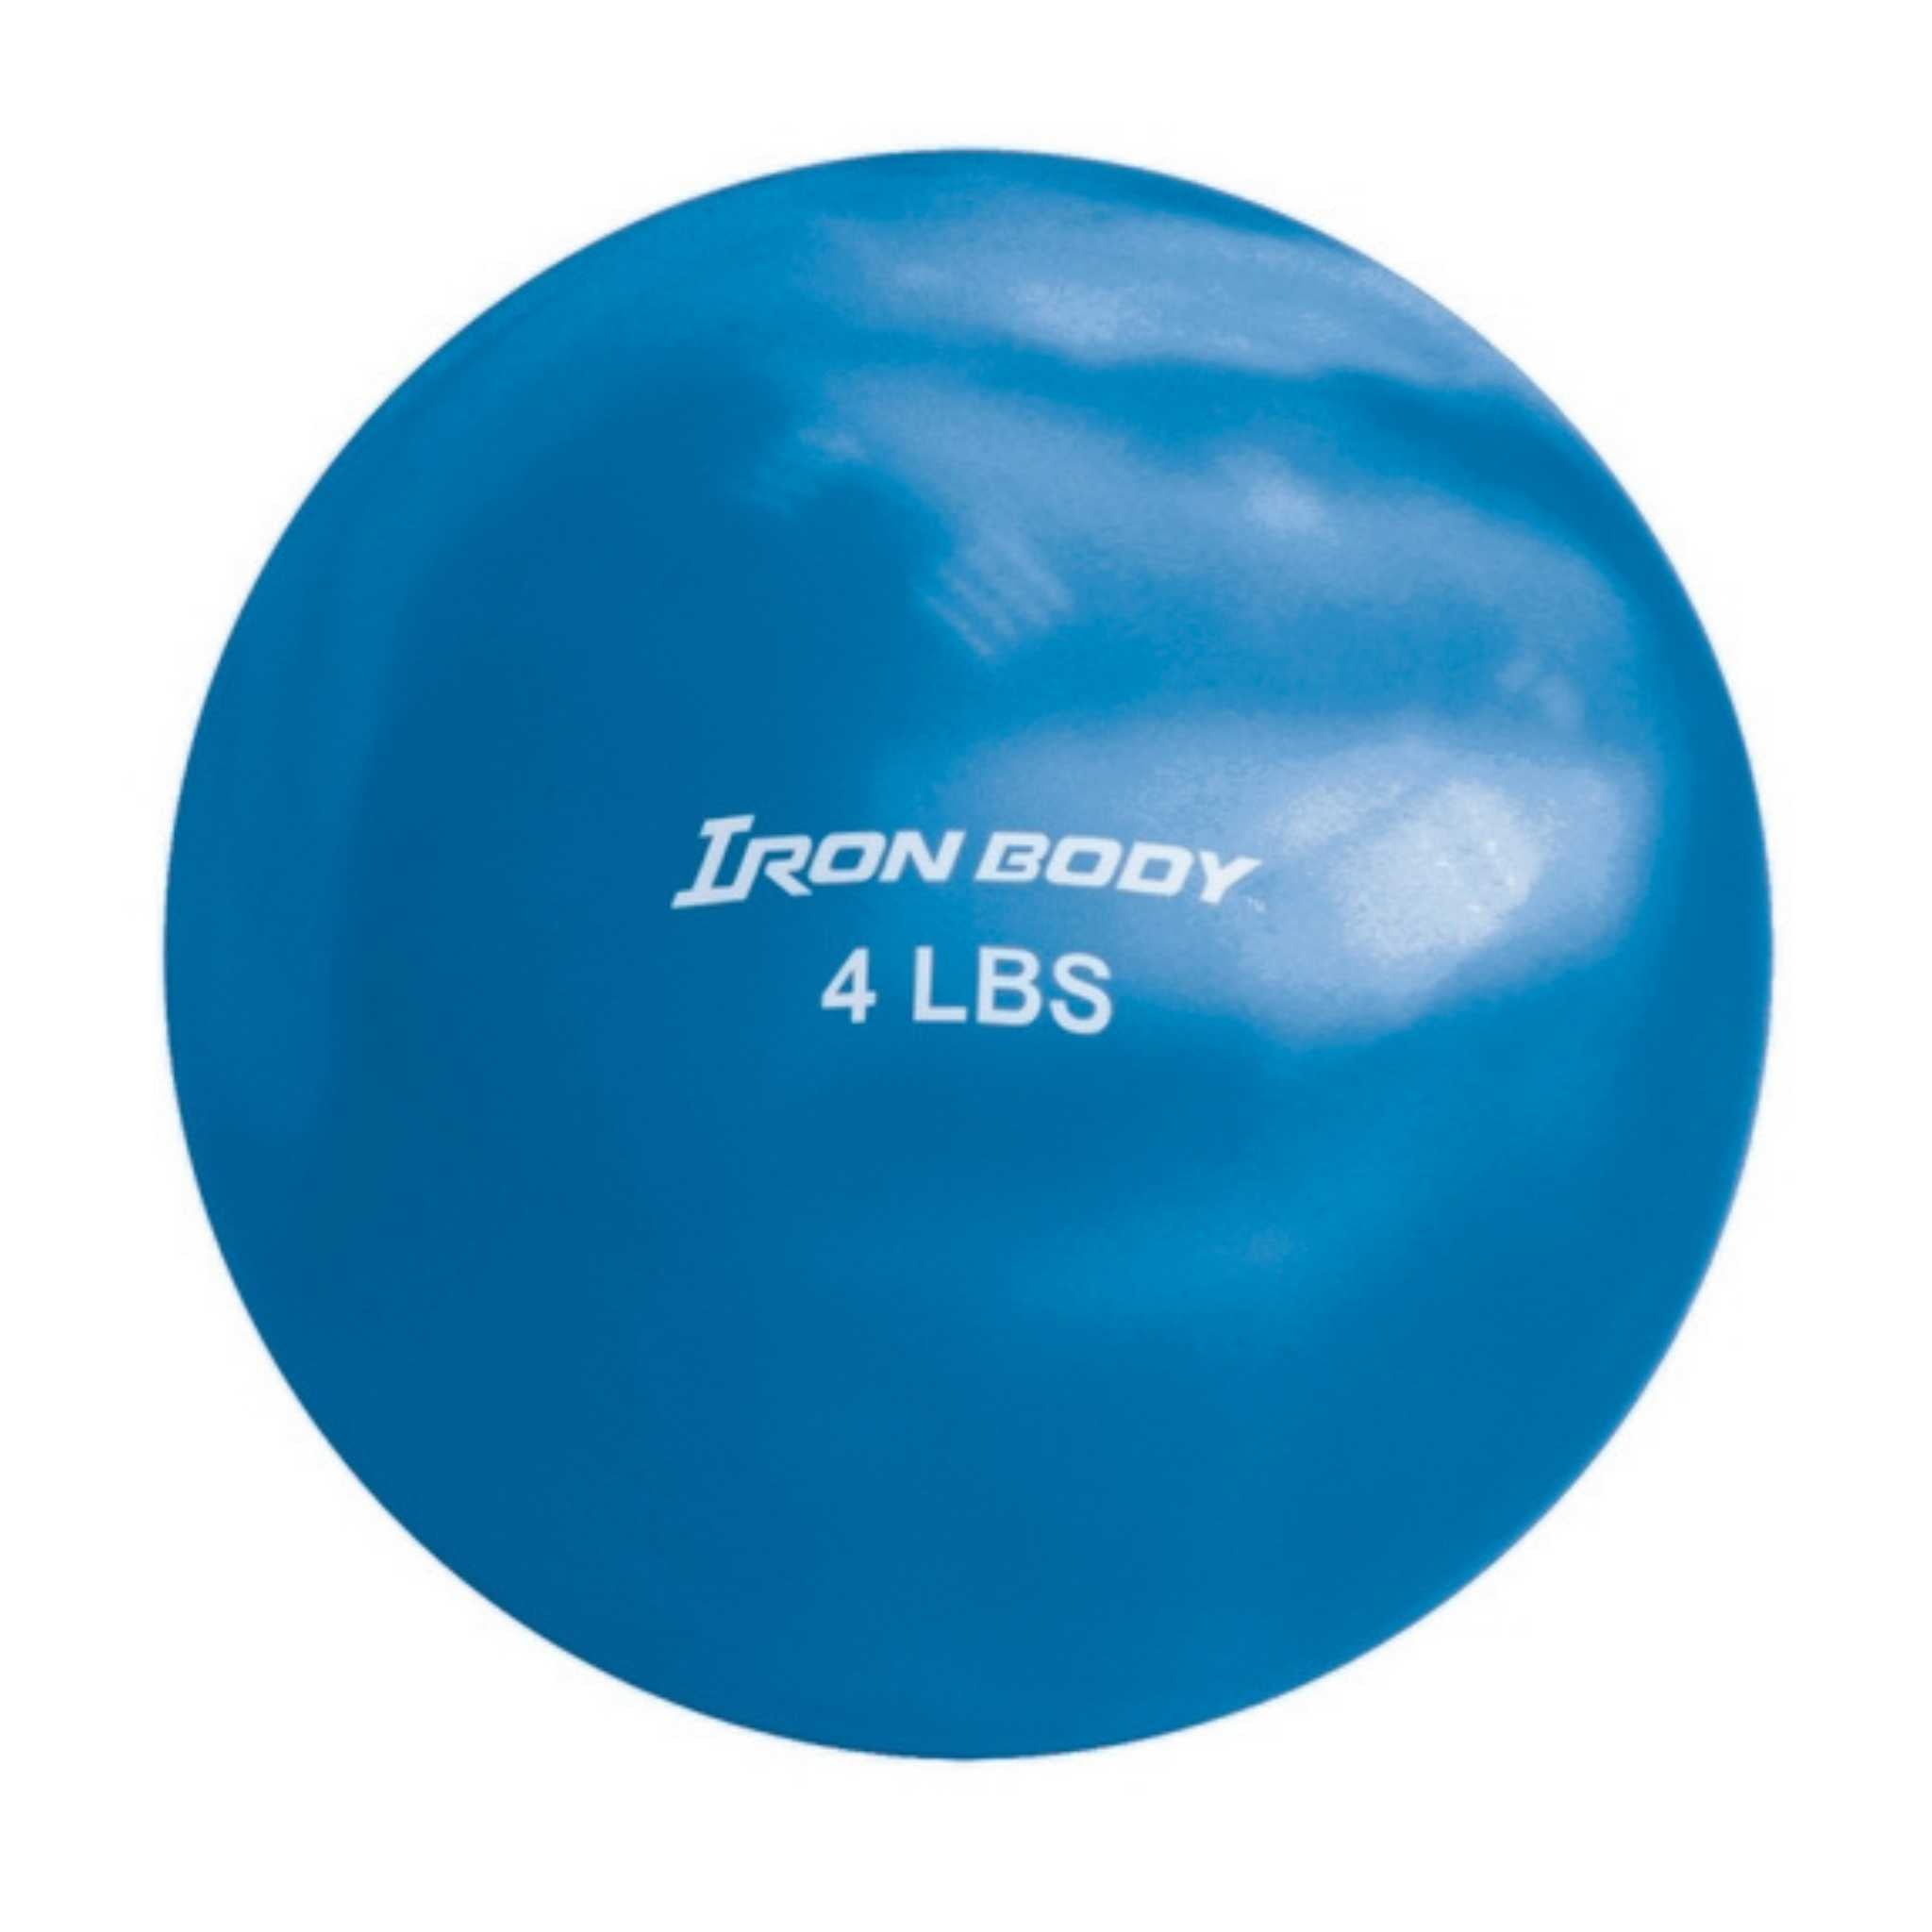 Toning Balls, For Pilates, Yoga, Aerobics, and Stretching, Available in 2 and 4 lbs.